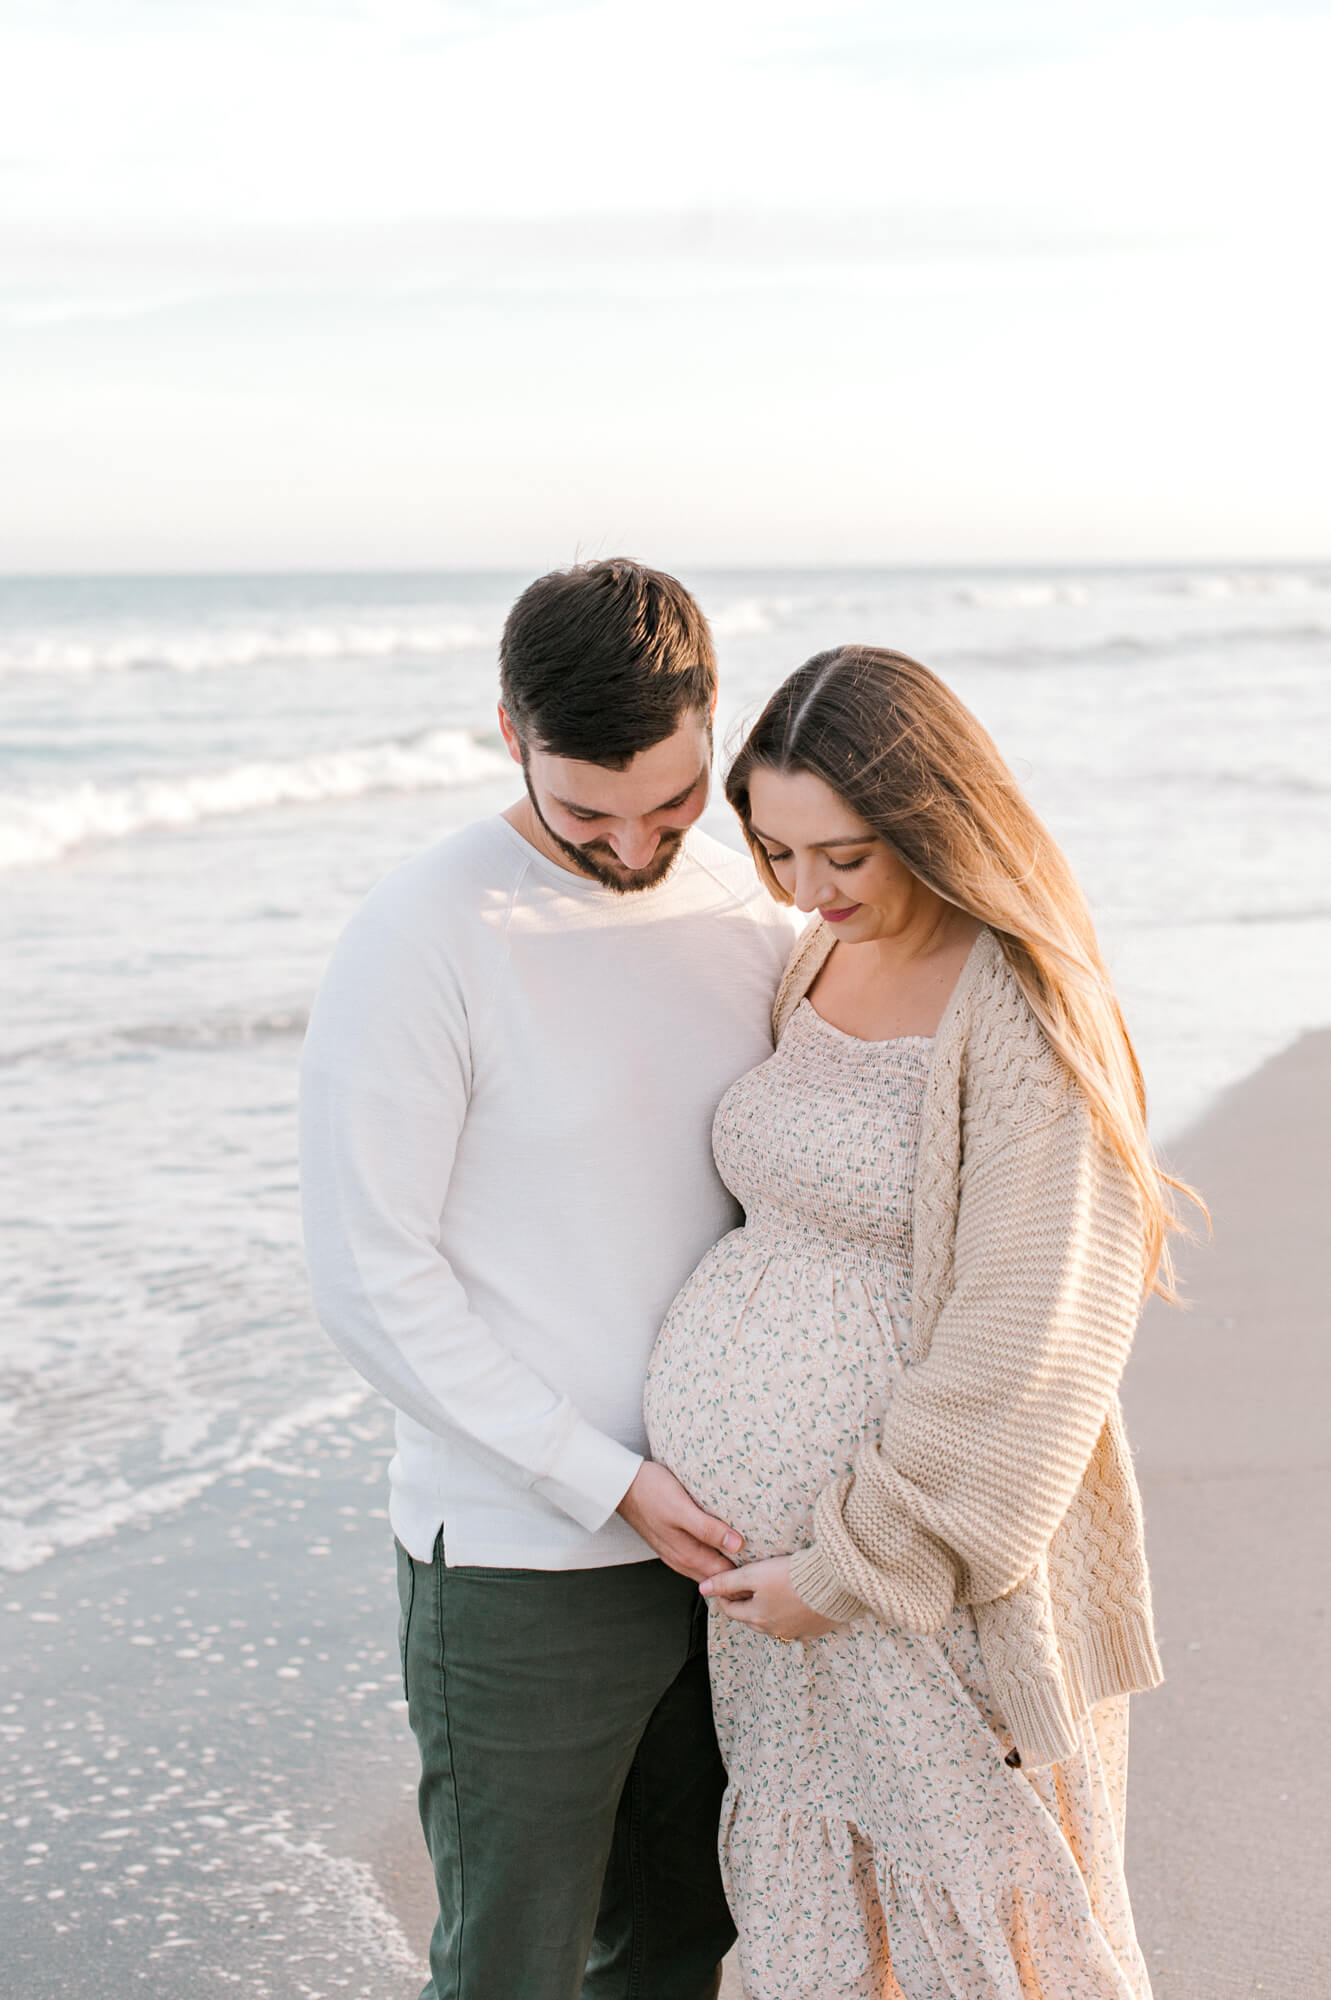 Soon to be parents of a babygirl admire and hold the moms belly on the beach while chatting about Tree of Life Birth Center.